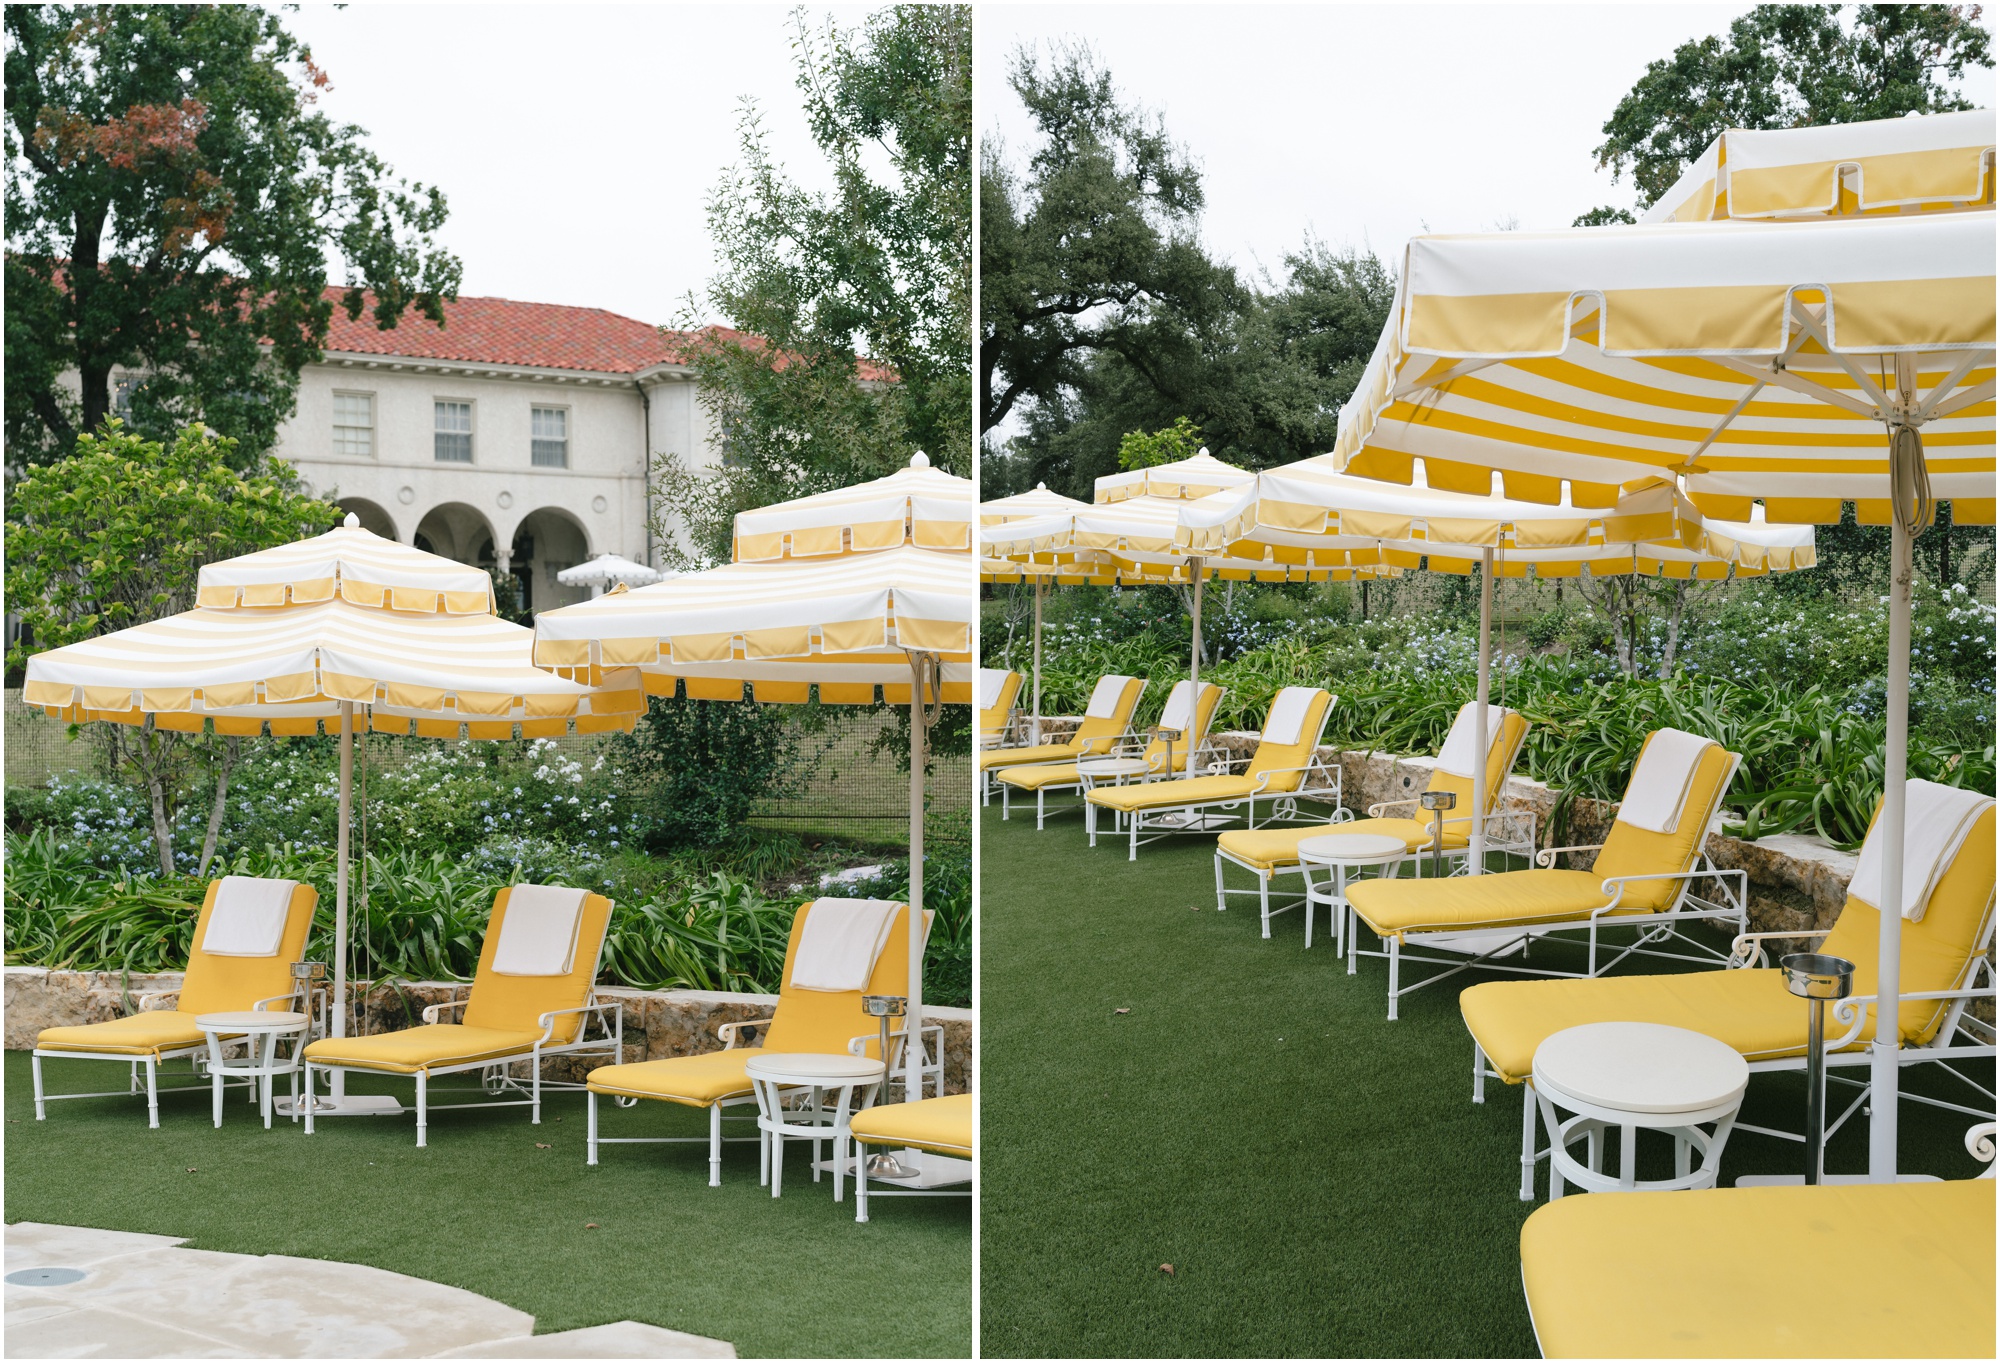 commodore perry estate wedding with yellow umbrellas at the pool